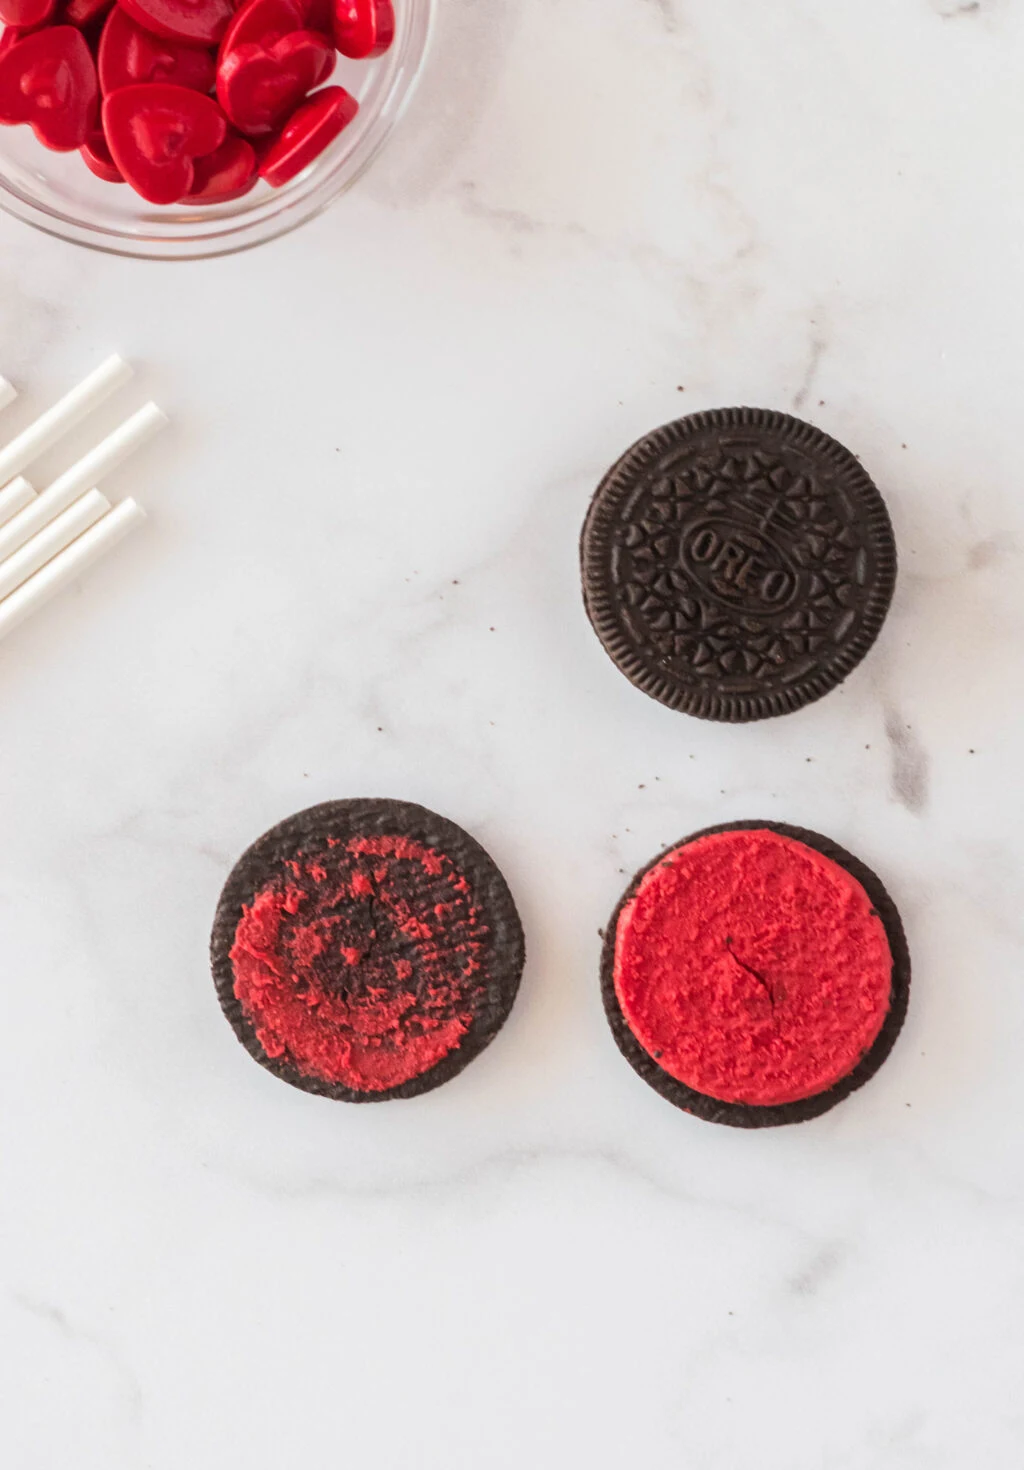 red oreos separated in half